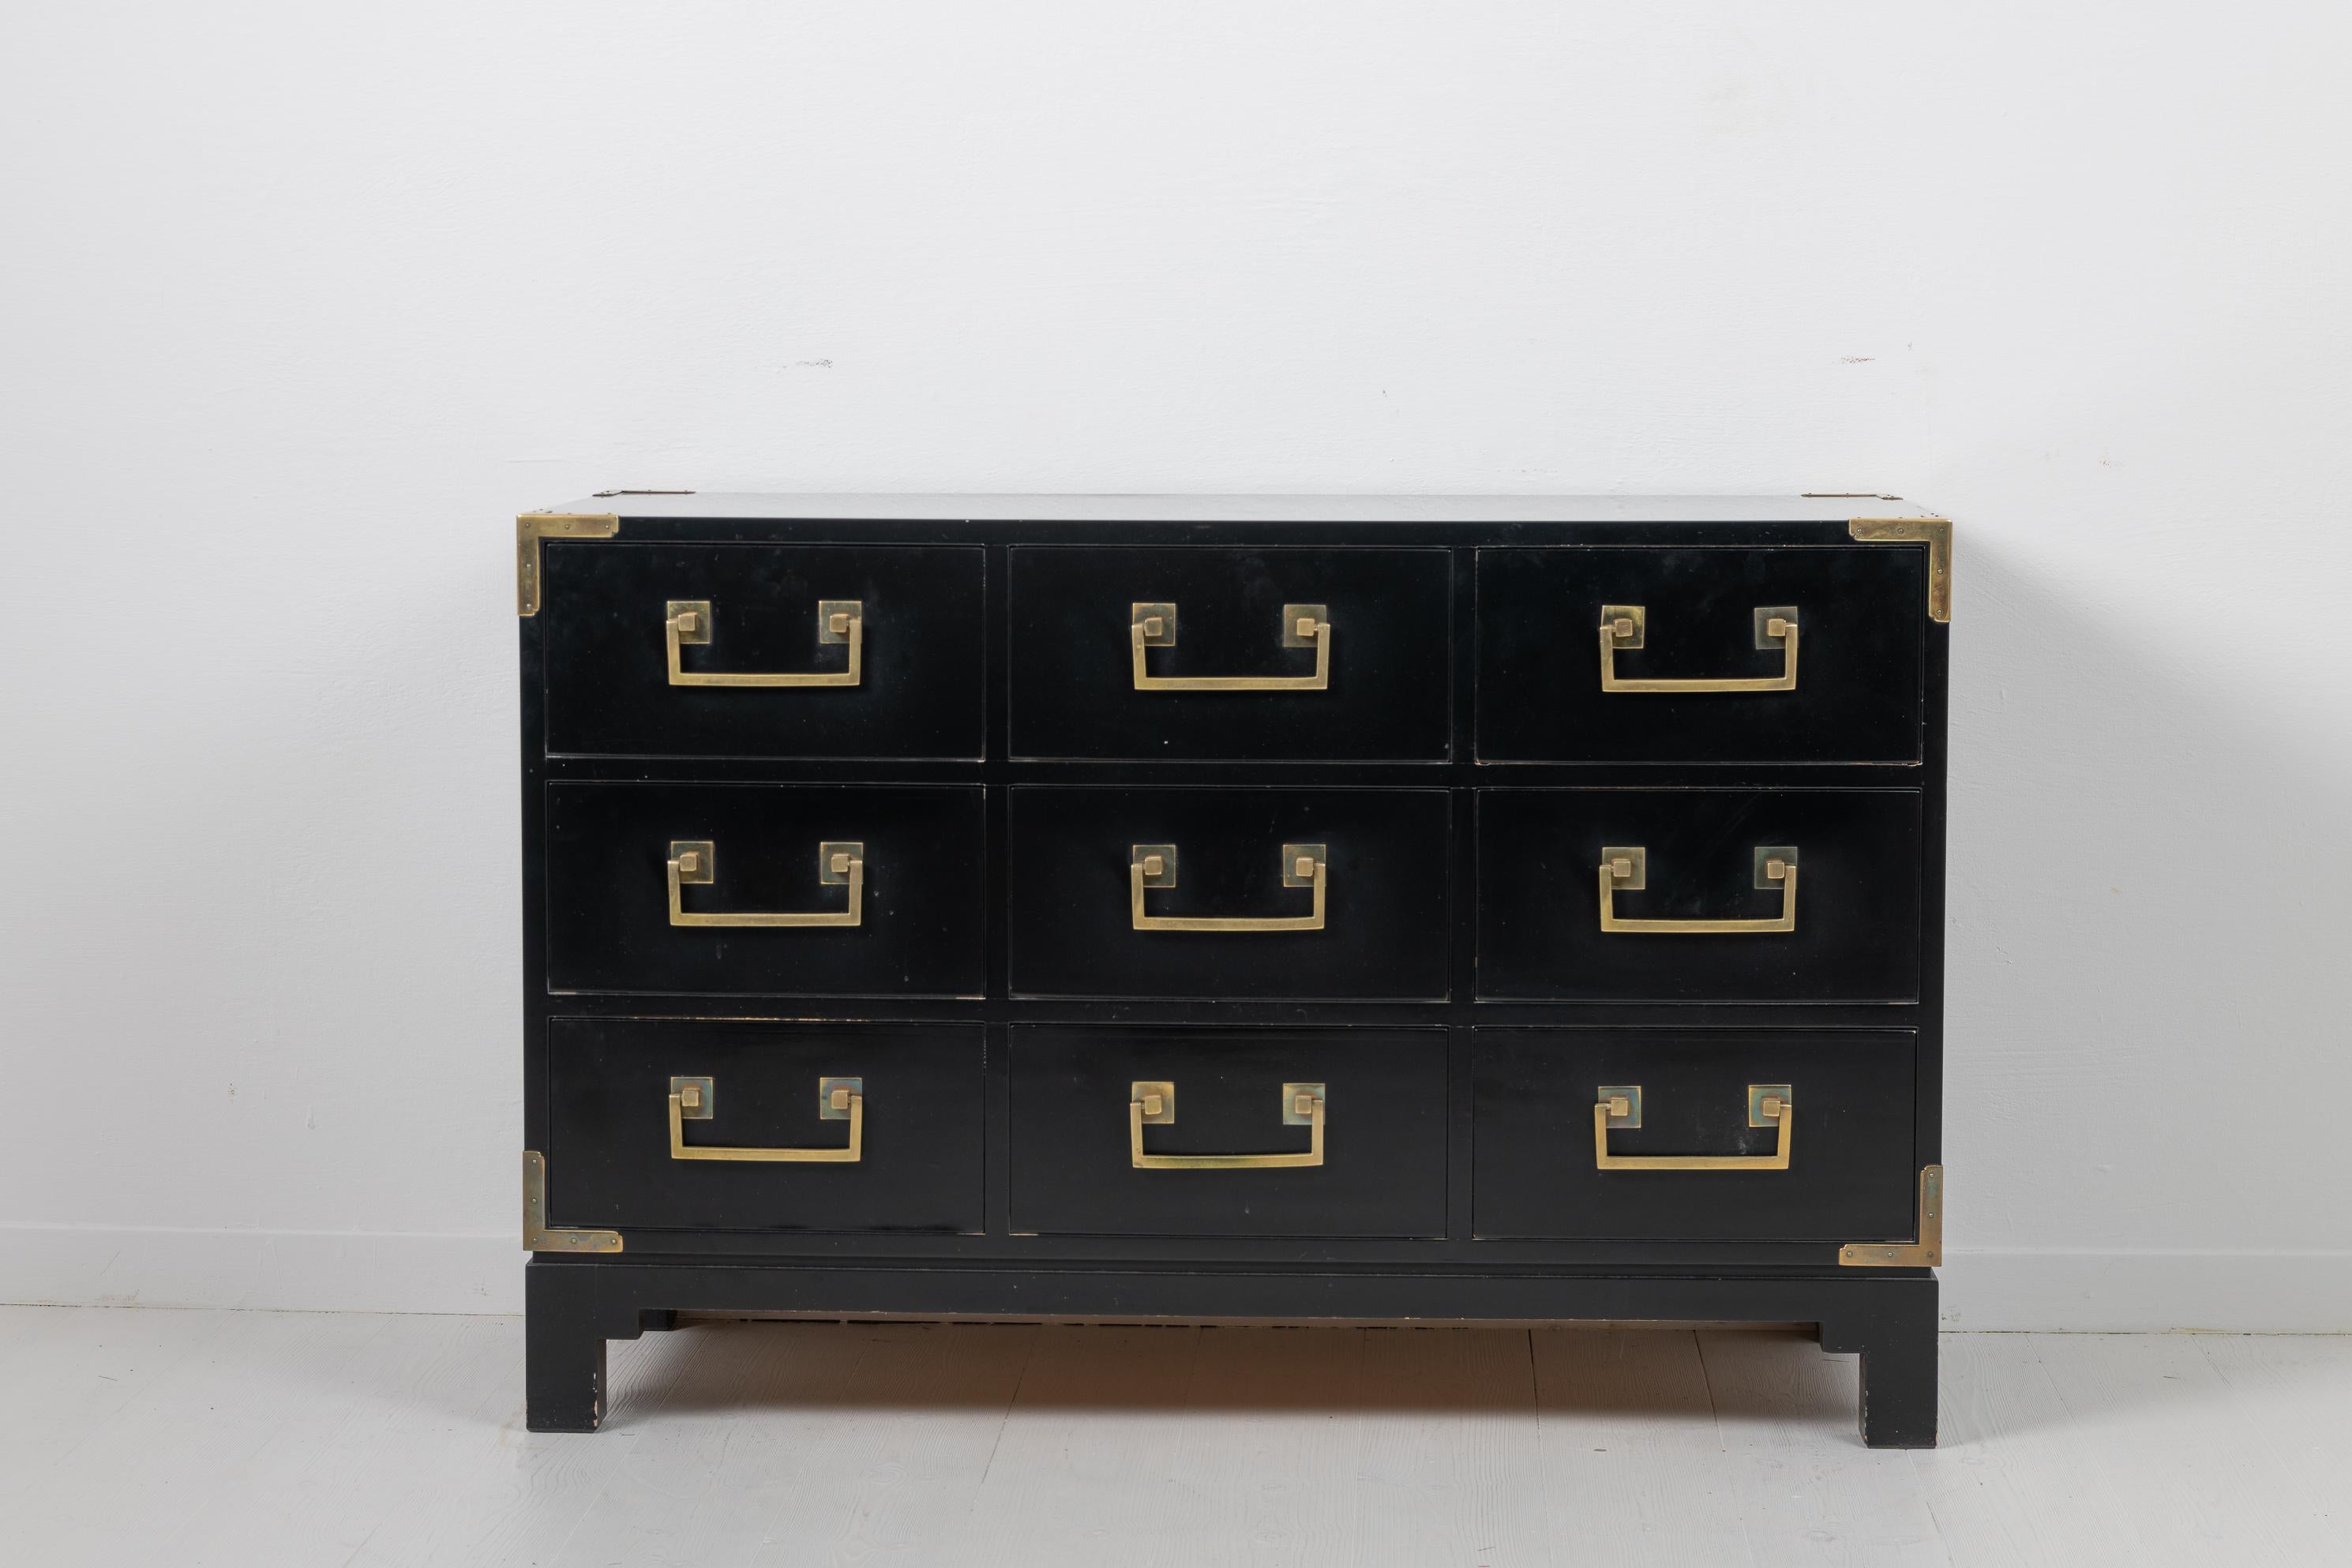 Black Scandinavian Modern chest of drawers by Ove Feuk for Nordiska Kompaniet. The chest is of the model 013 and from the 1960s to 1970s. Marked on the inside. The chest has 9 drawers, each with a statement brass handle, as well as corner plates in